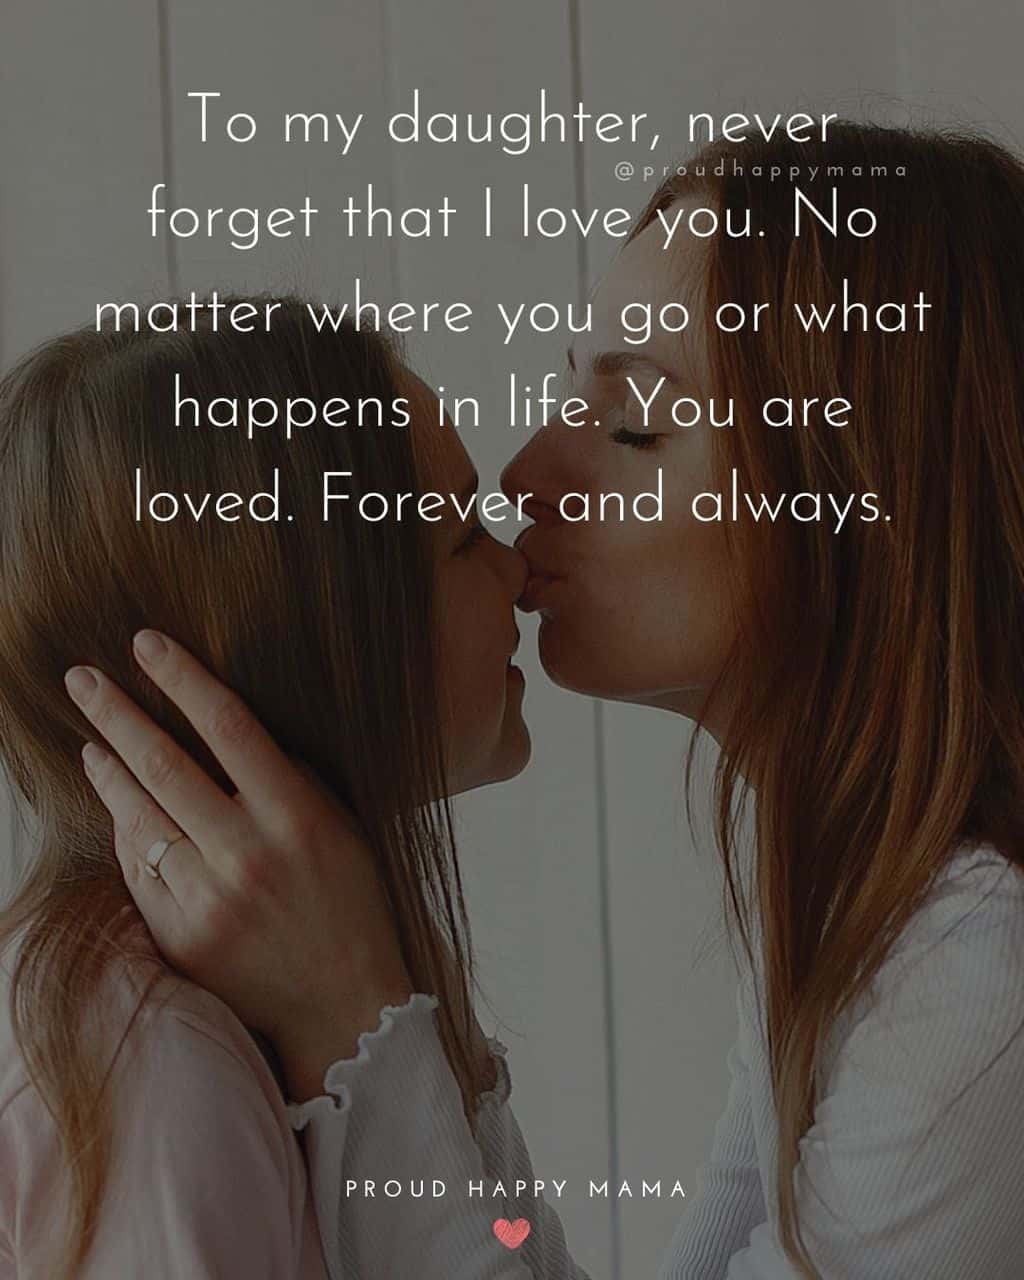 to my daughter quotes - To my daughter, never forget that I love you. No matter where you go or what happens in life. You are loved. Forever